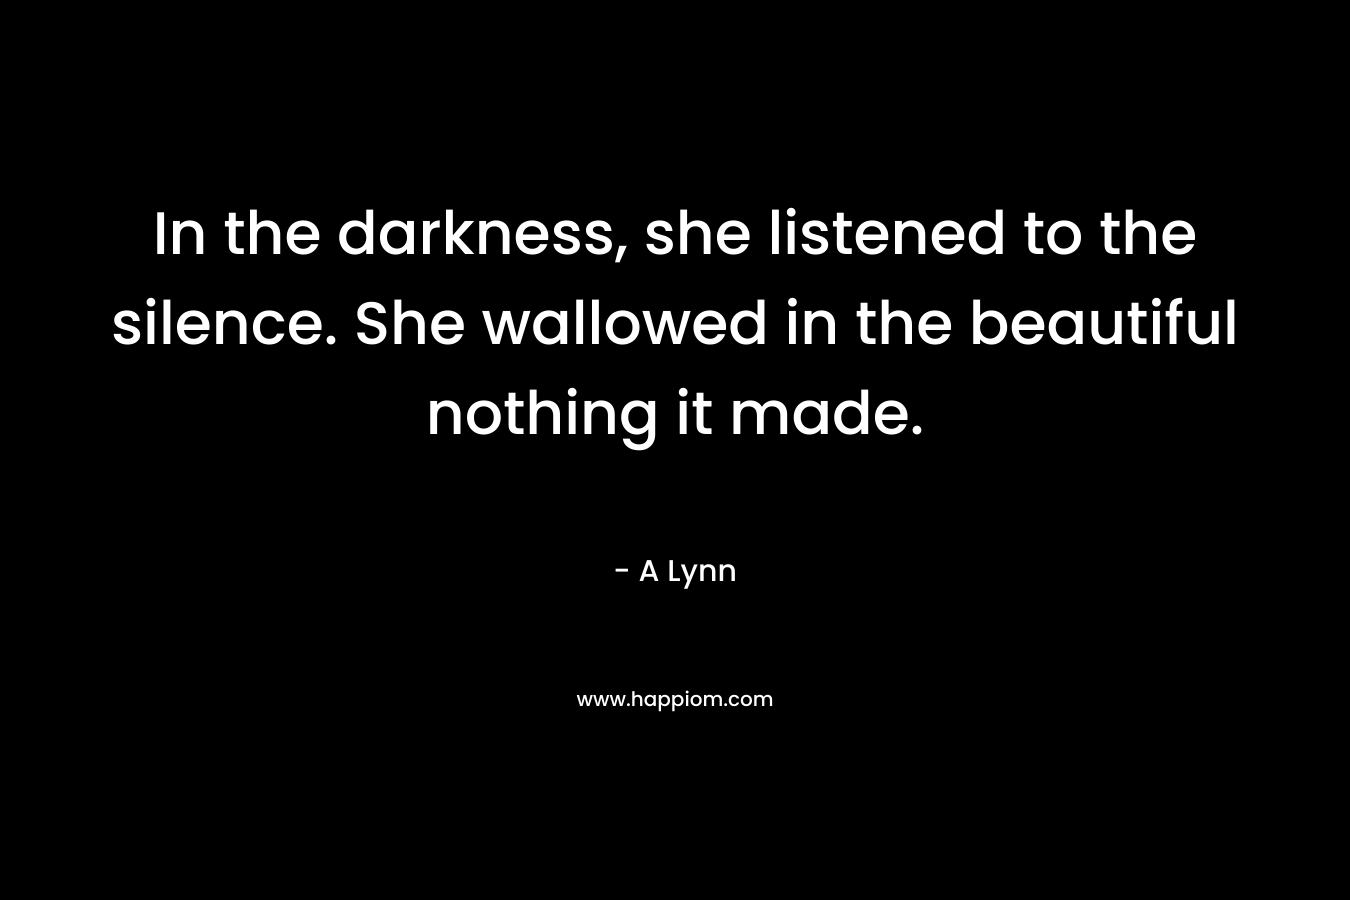 In the darkness, she listened to the silence. She wallowed in the beautiful nothing it made.